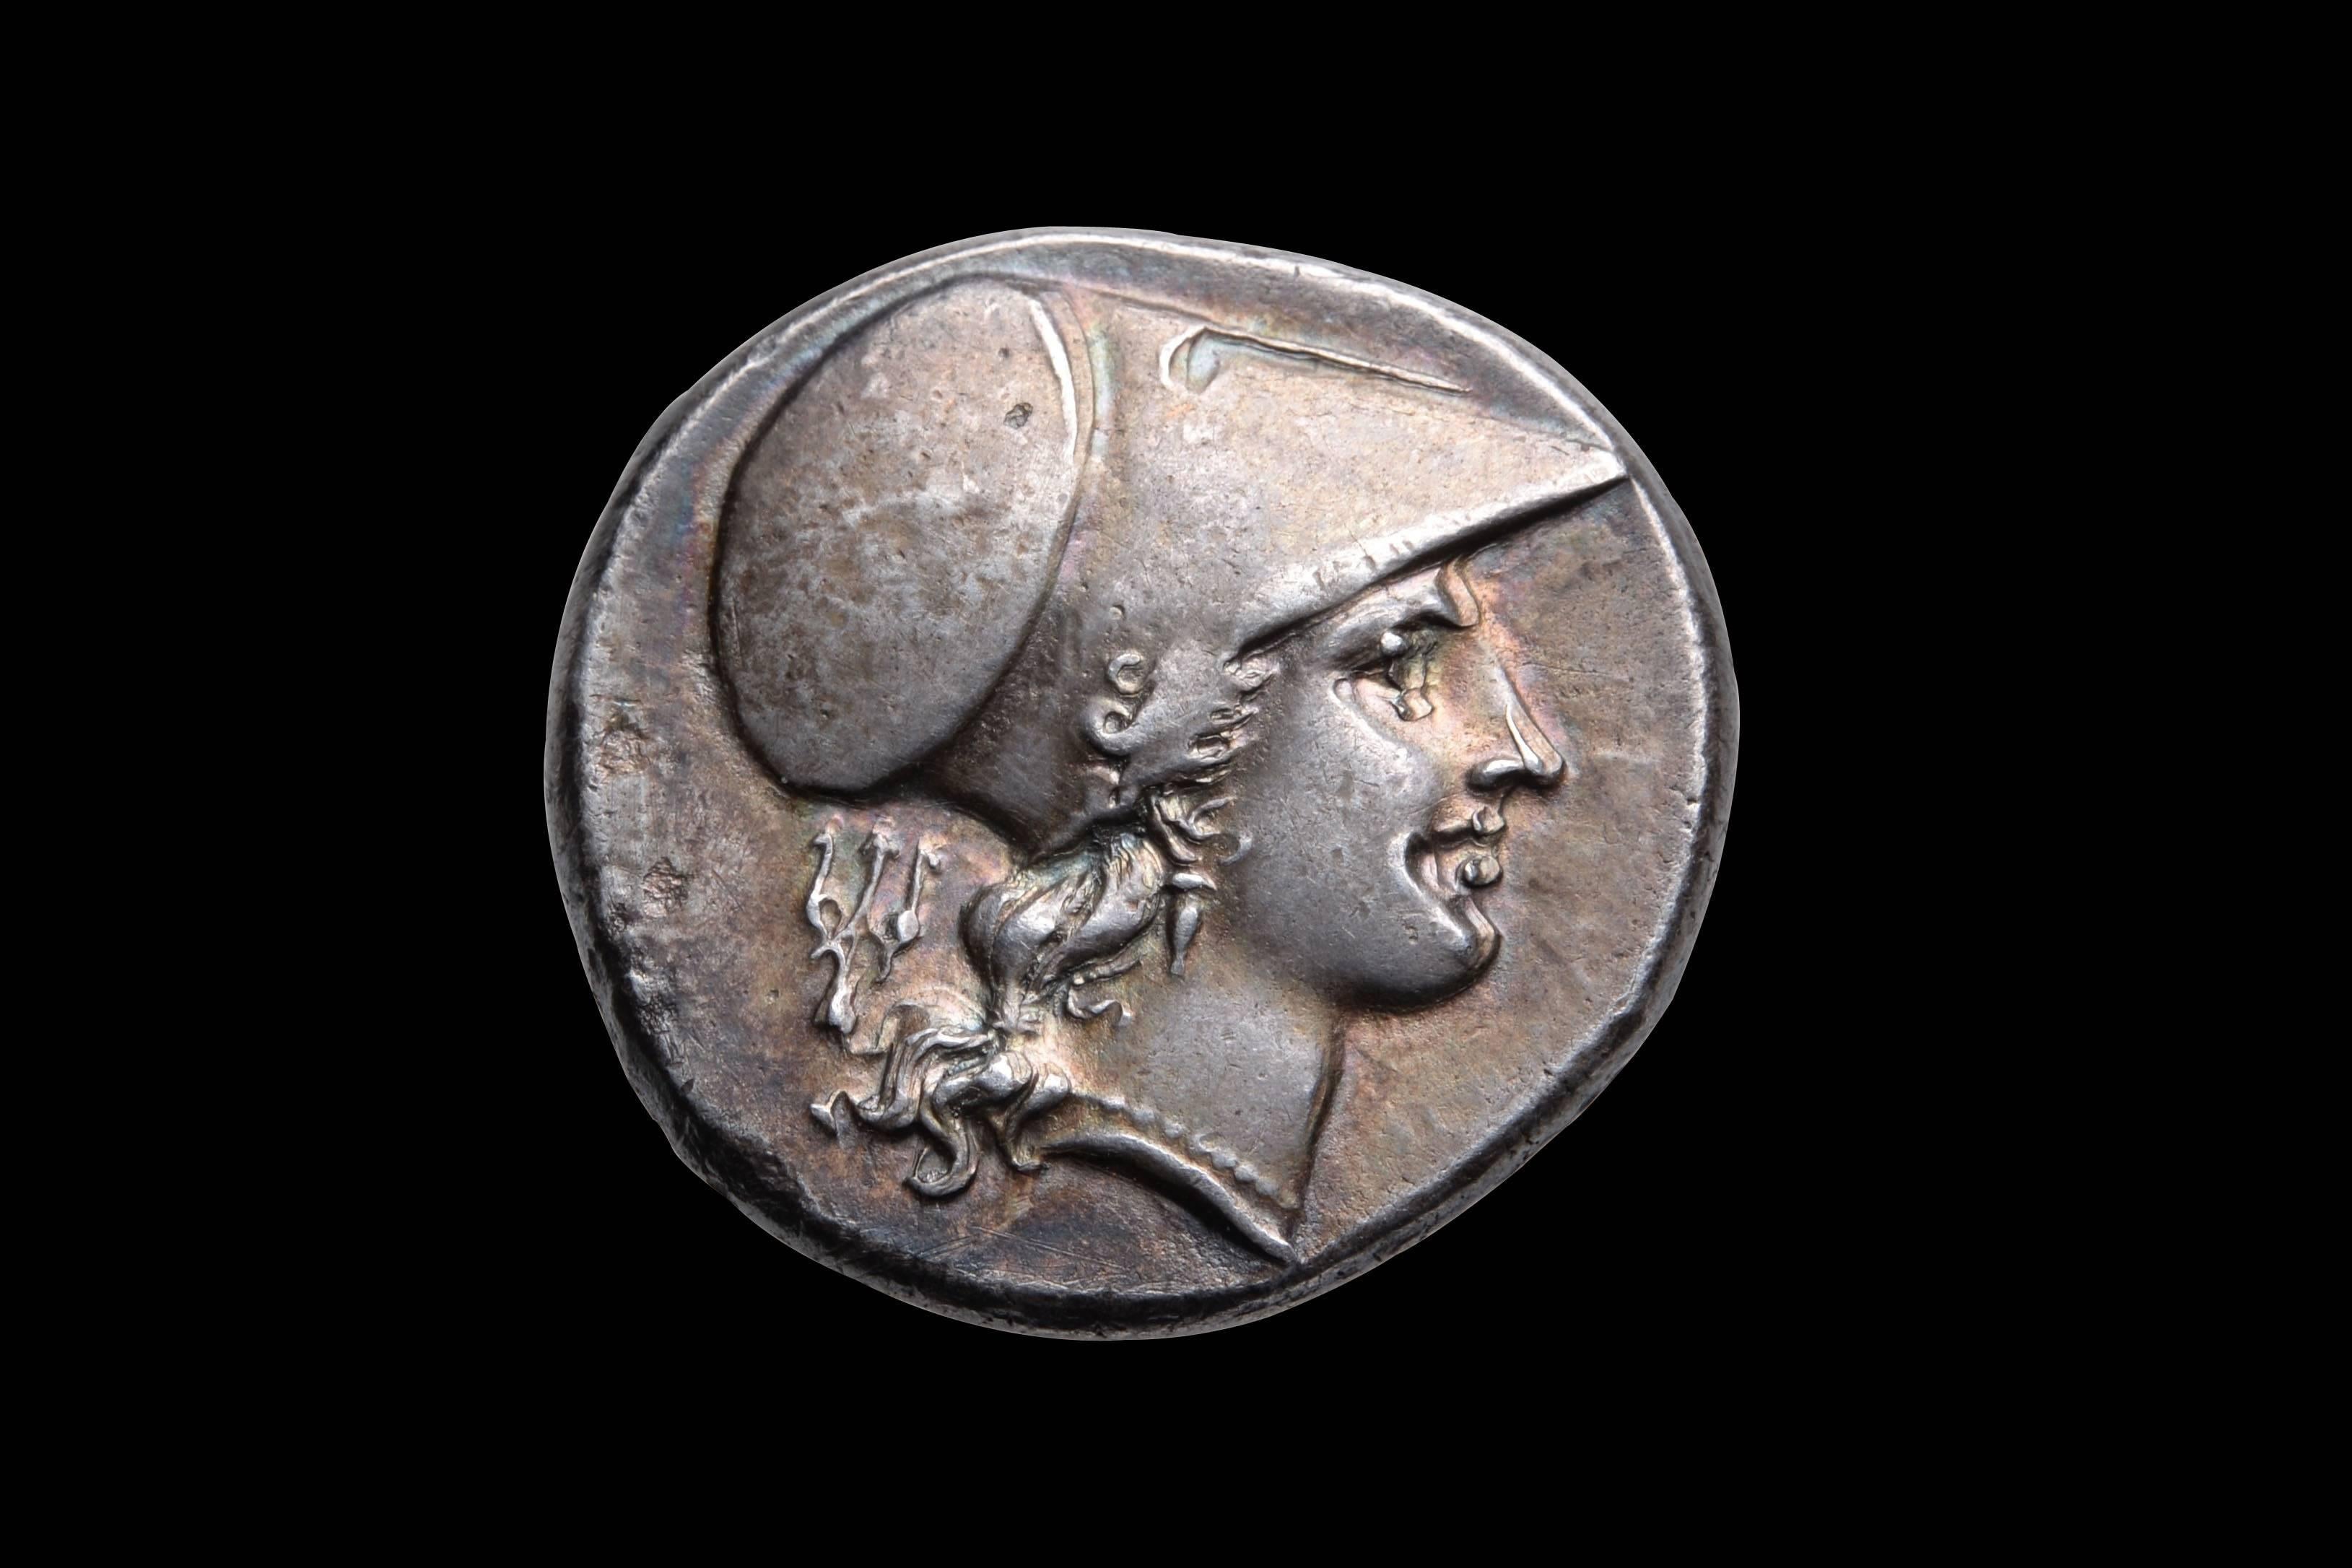 One of the most beautiful depictions of Pegasus we have ever seen on an ancient coin.

An ancient Greek silver stater, minted by the great city of Syracuse under tyrant Agathokles, circa 304-289 BC.

The obverse with goddess, Aphrodite. The